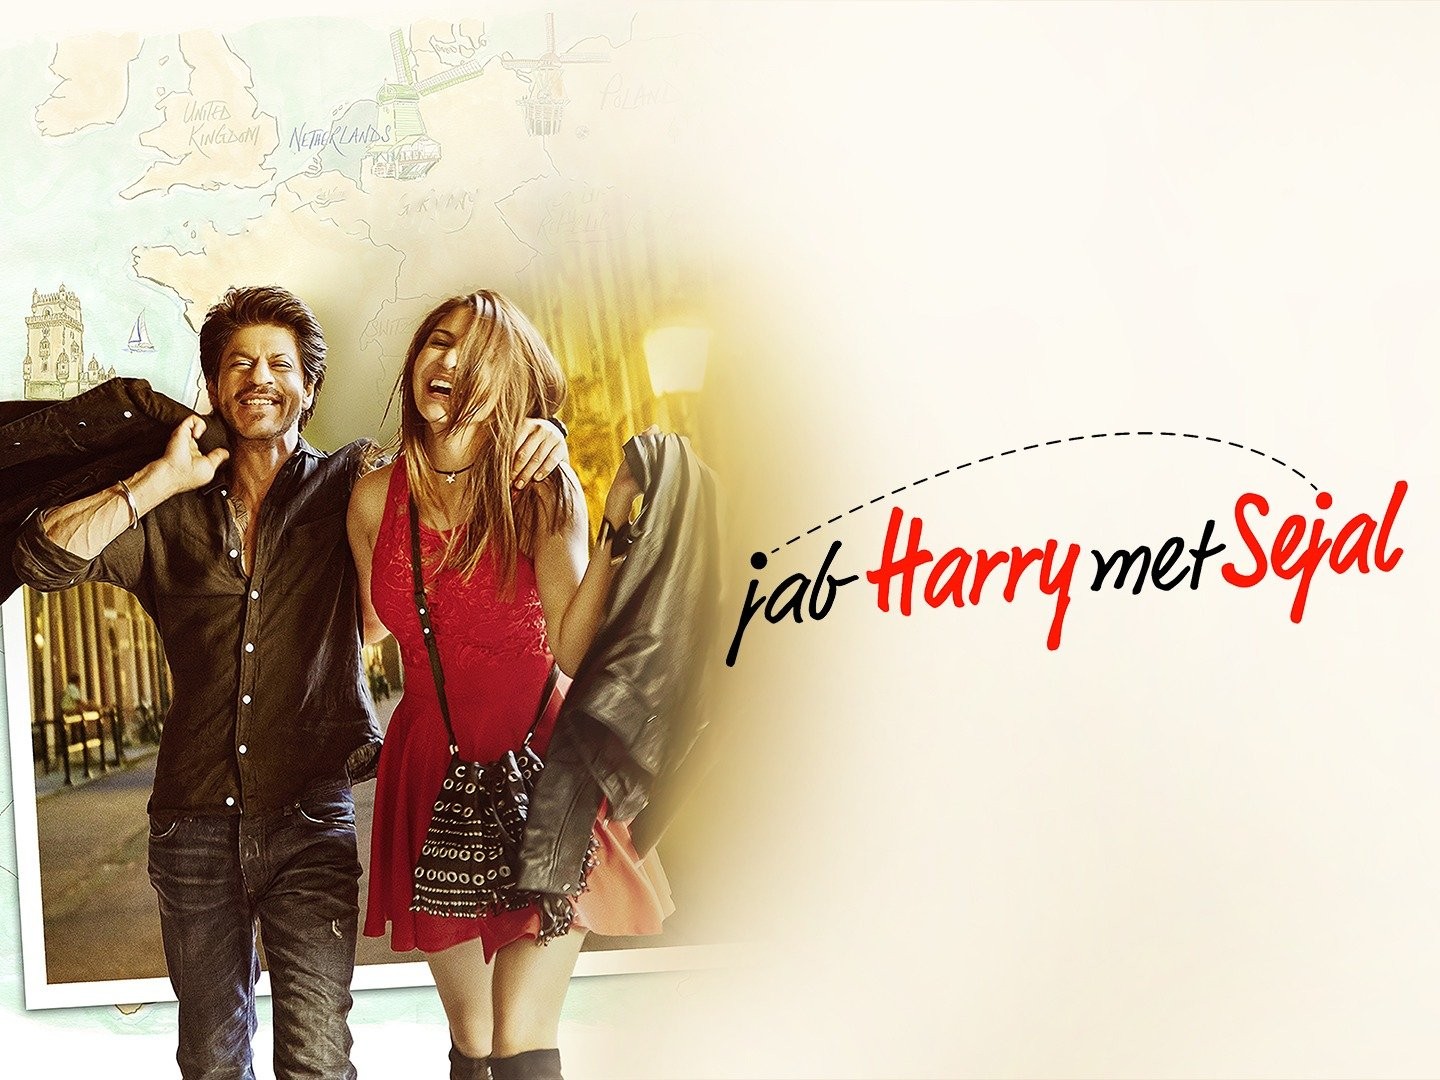 Why did Jab Harry Met Sejal receive such negative reviews? - Quora